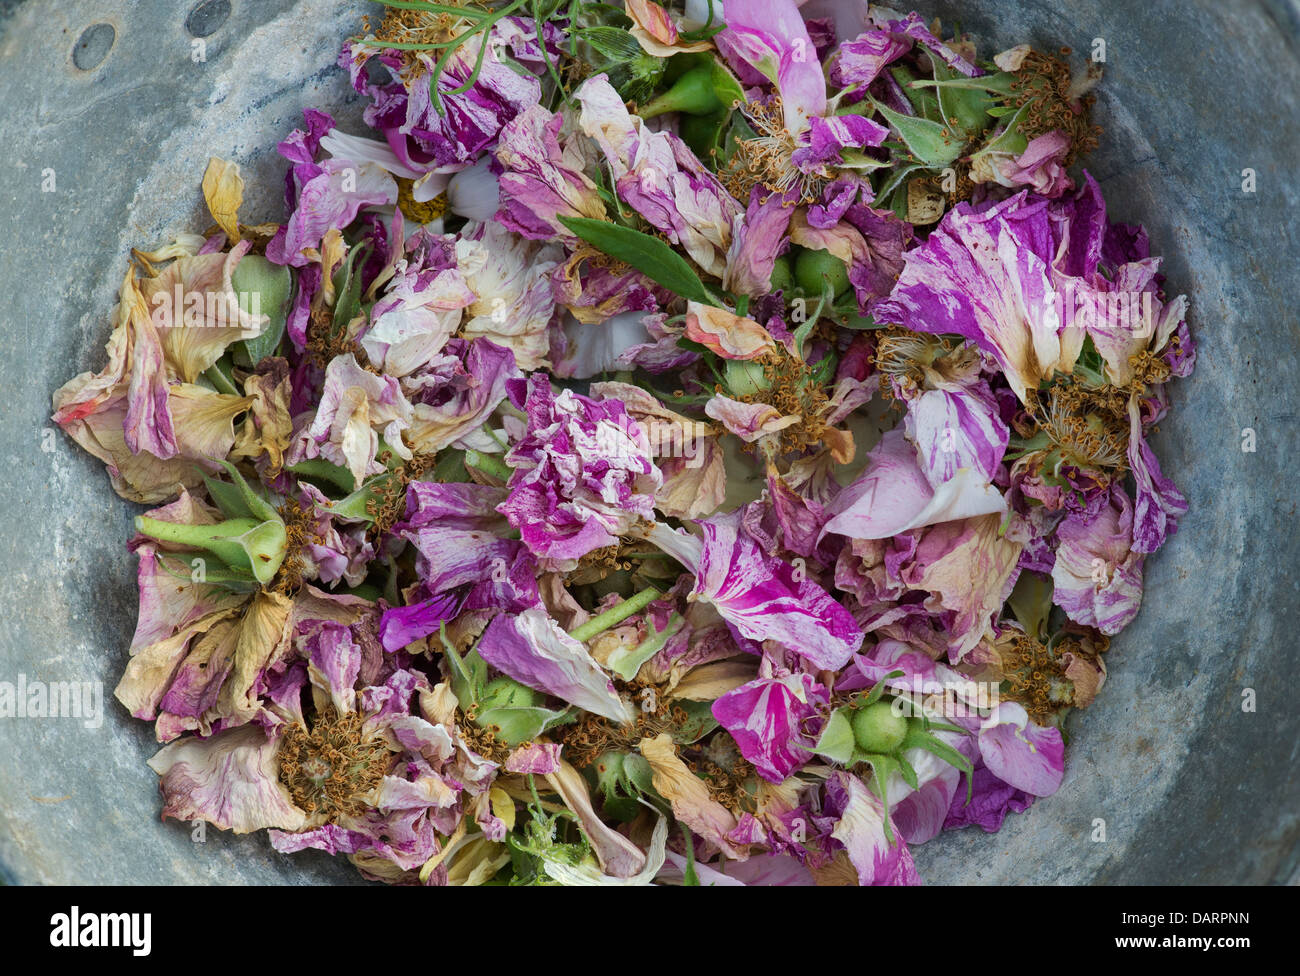 Dead headed roses with cutter in a metal pan Stock Photo